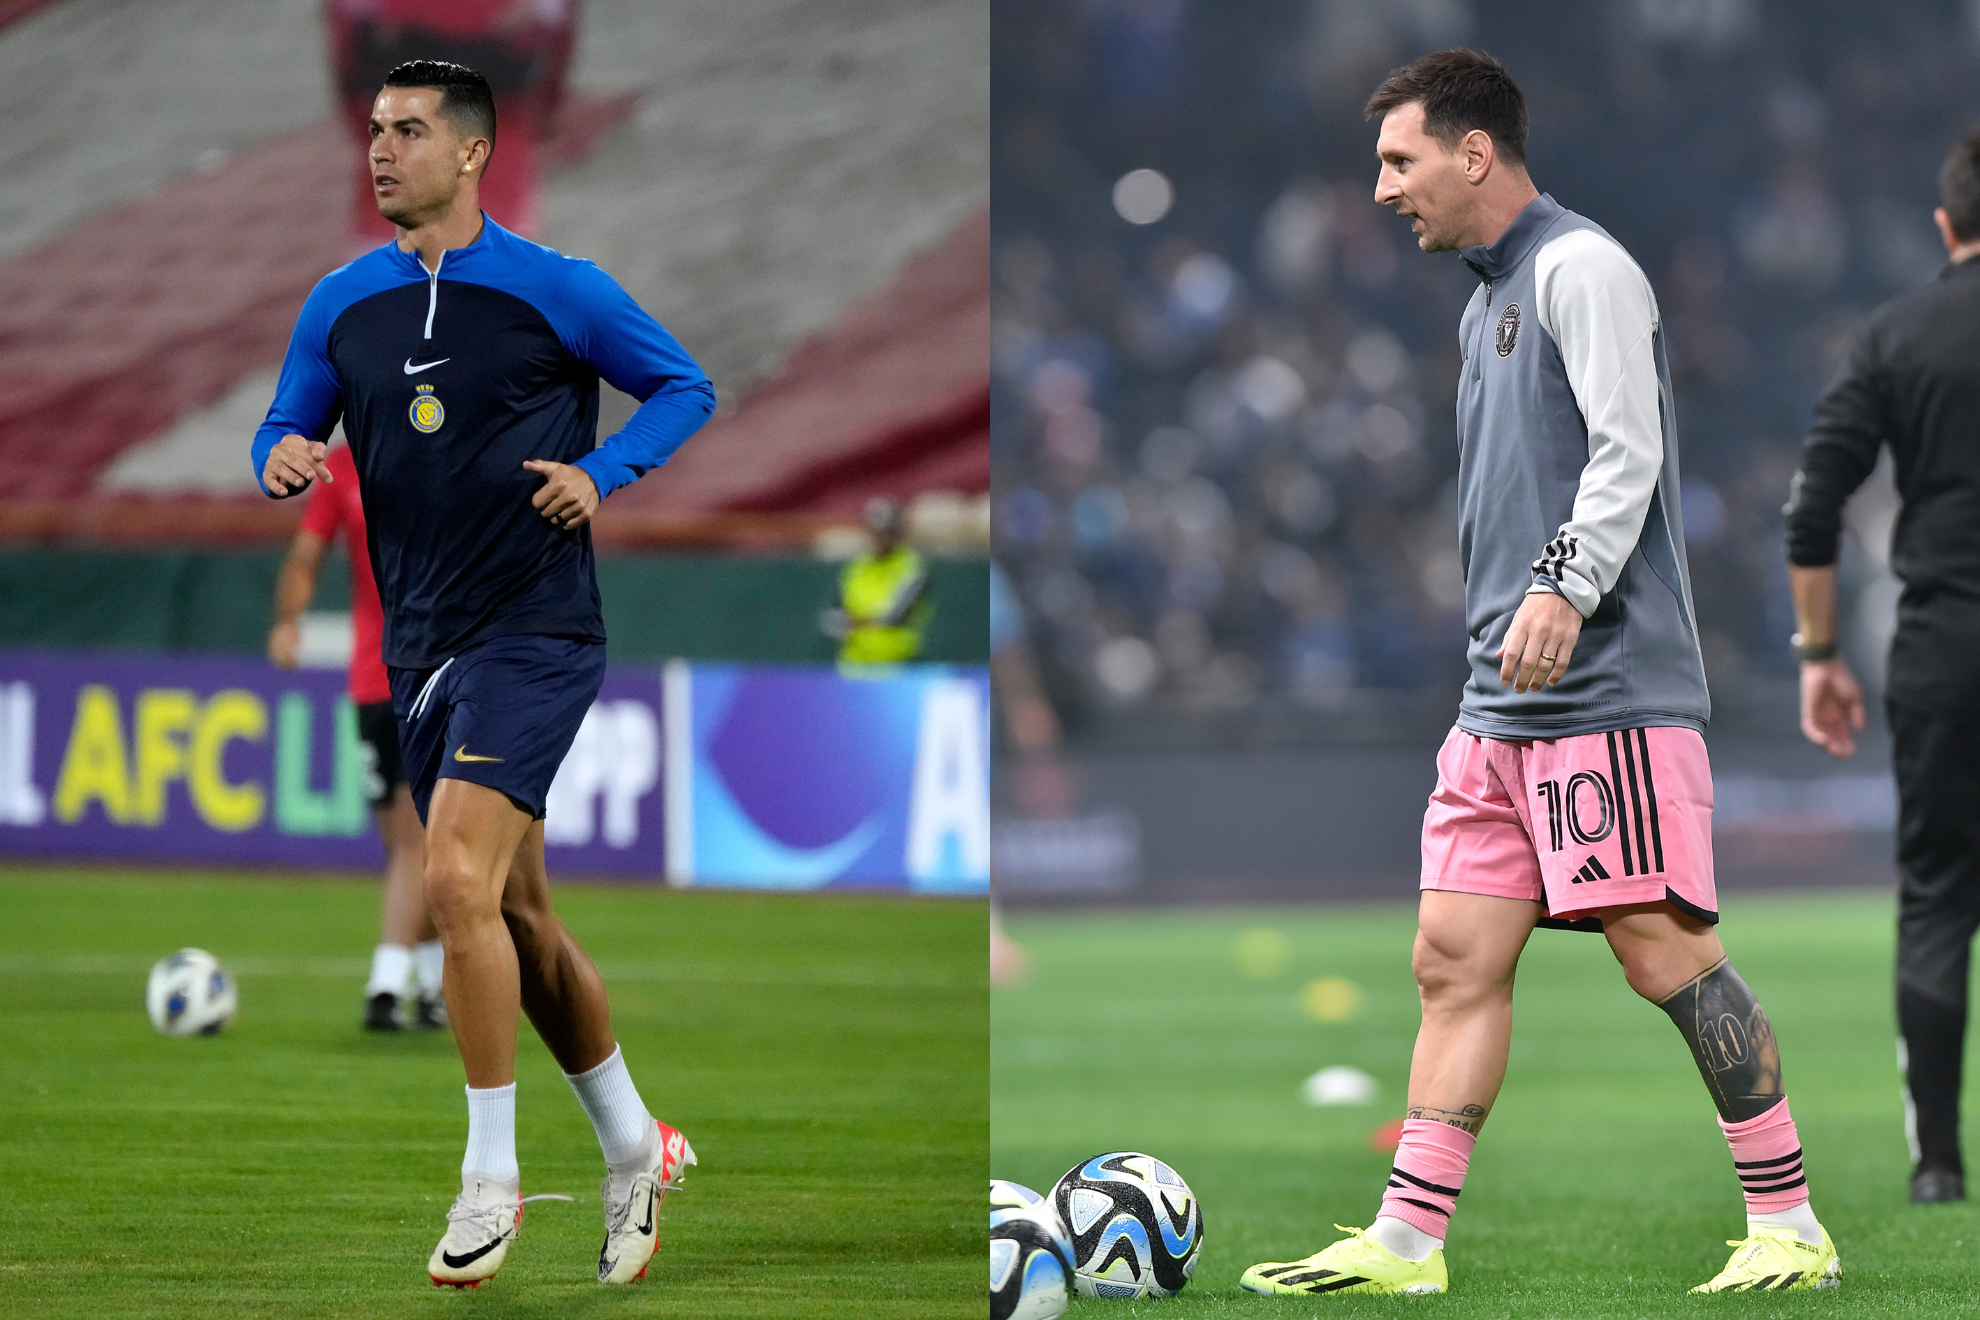 The Last Dance between Messi and Ronaldo will have to wait.